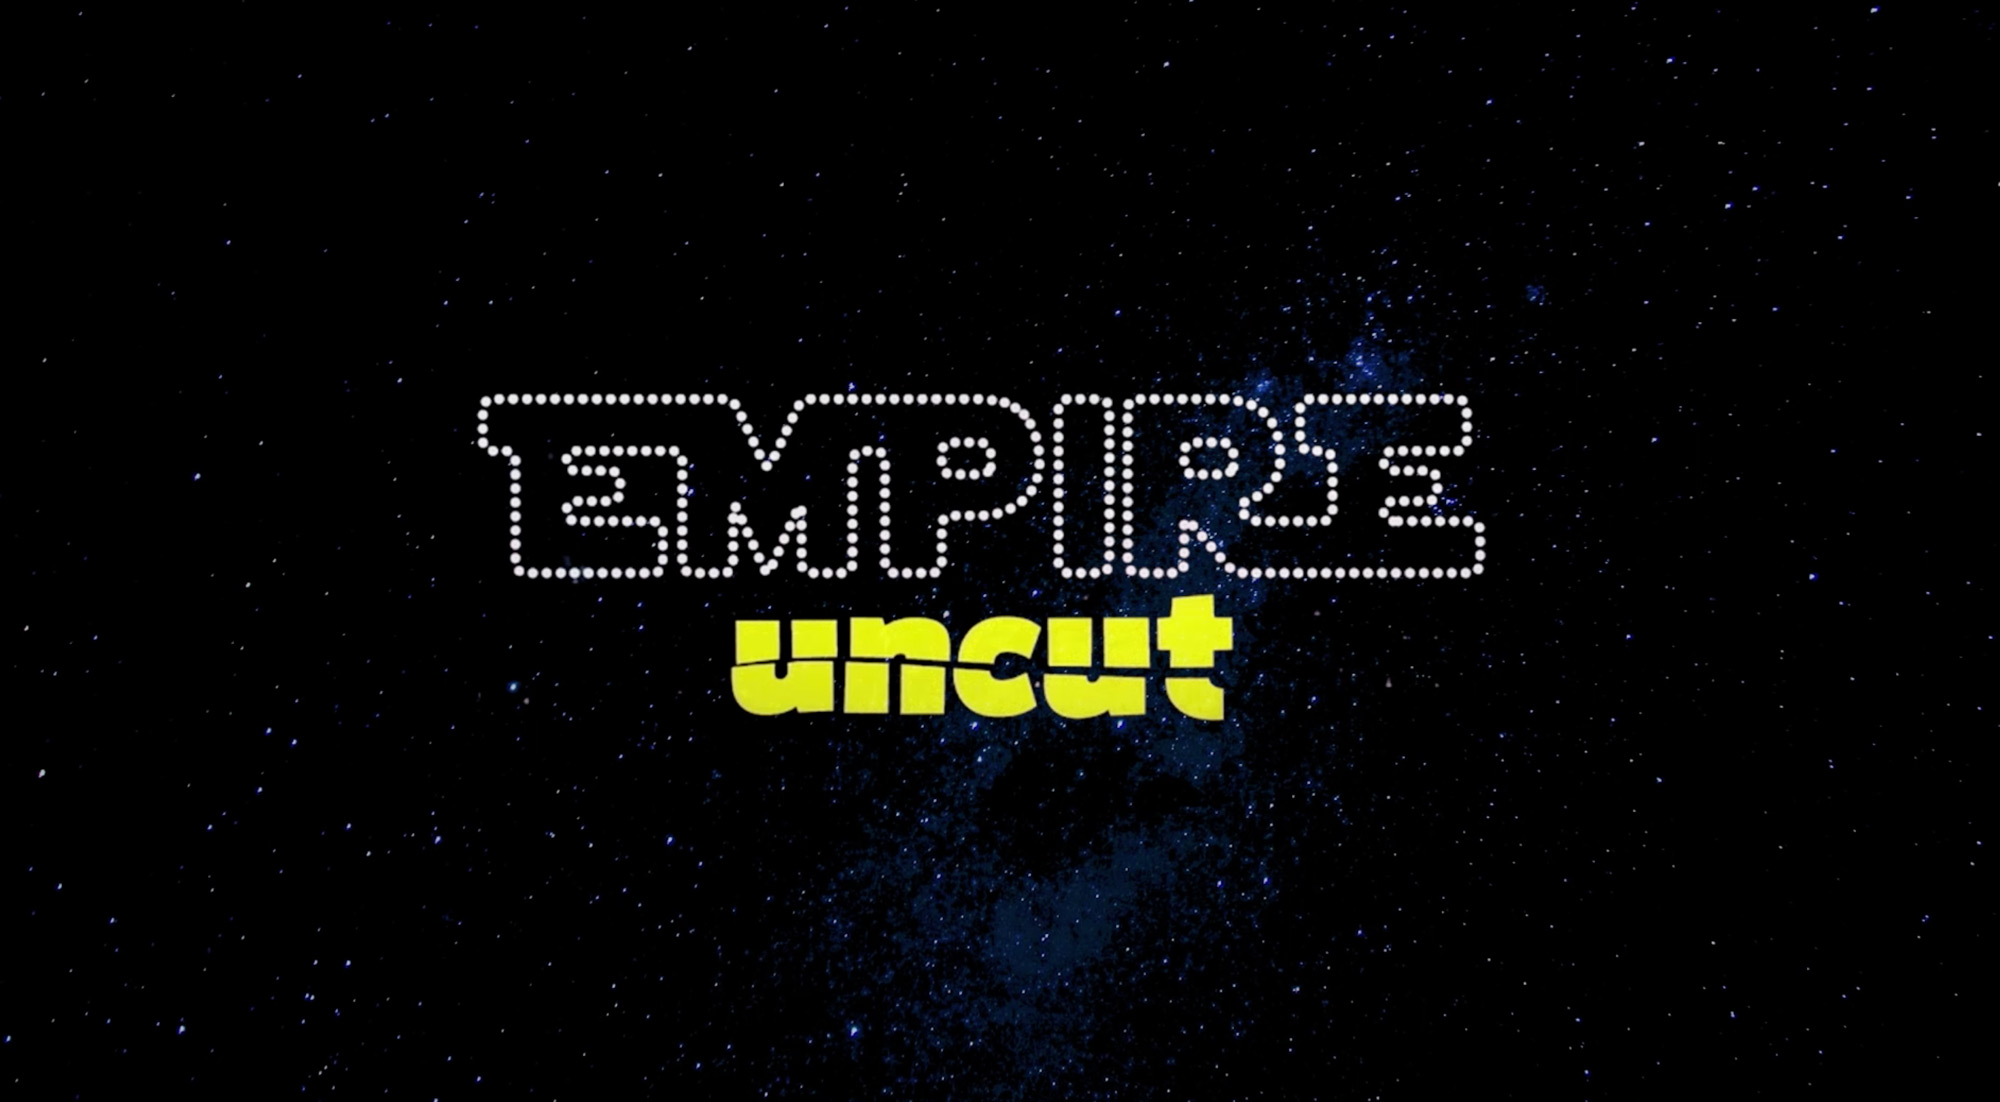 StarWars.com Debuts ‘The Empire Strikes Back Uncut’ and Announces the Return of the Star Wars Fan Film Awards